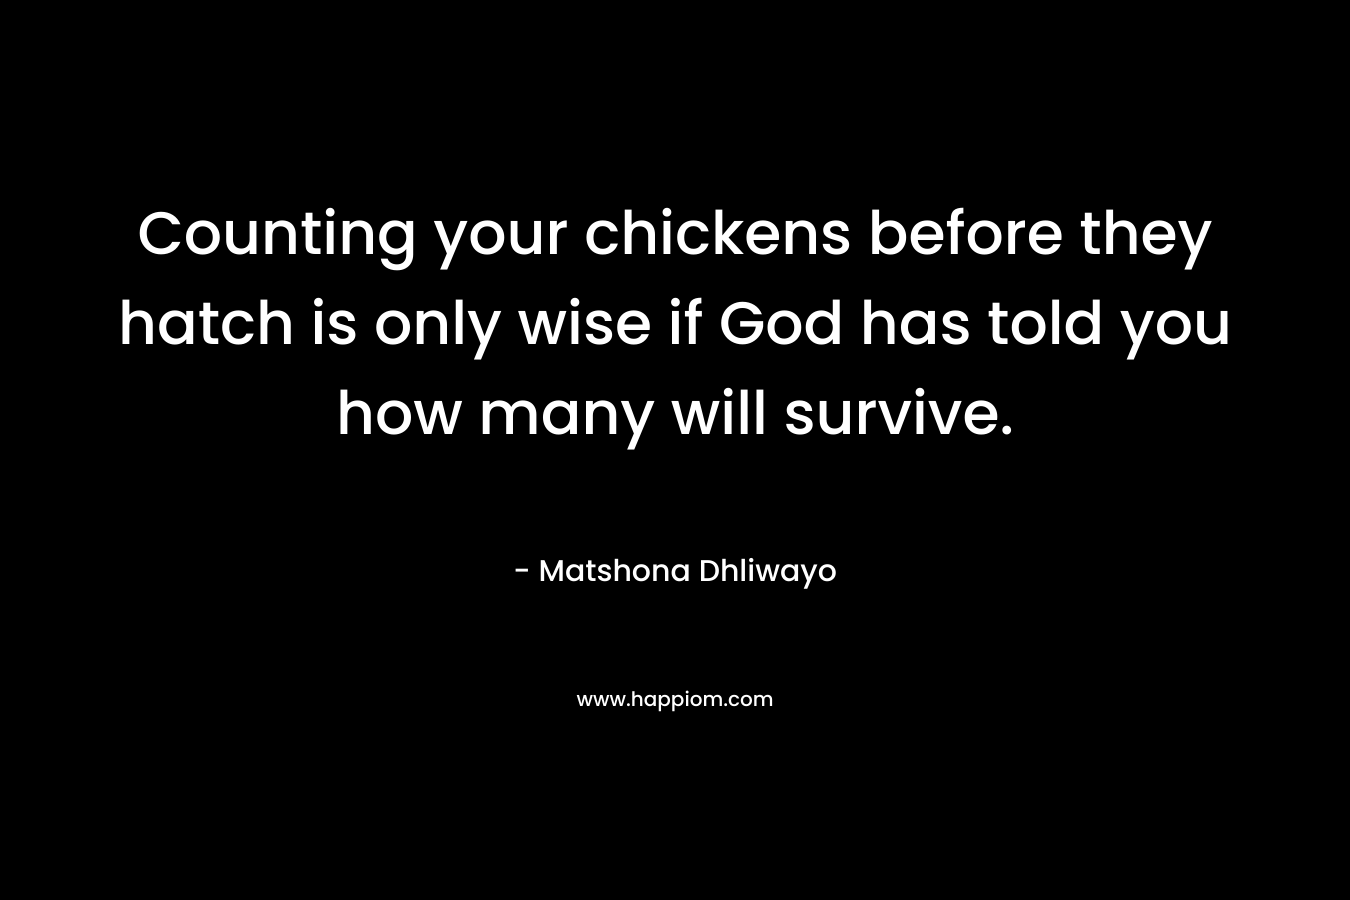 Counting your chickens before they hatch is only wise if God has told you how many will survive.